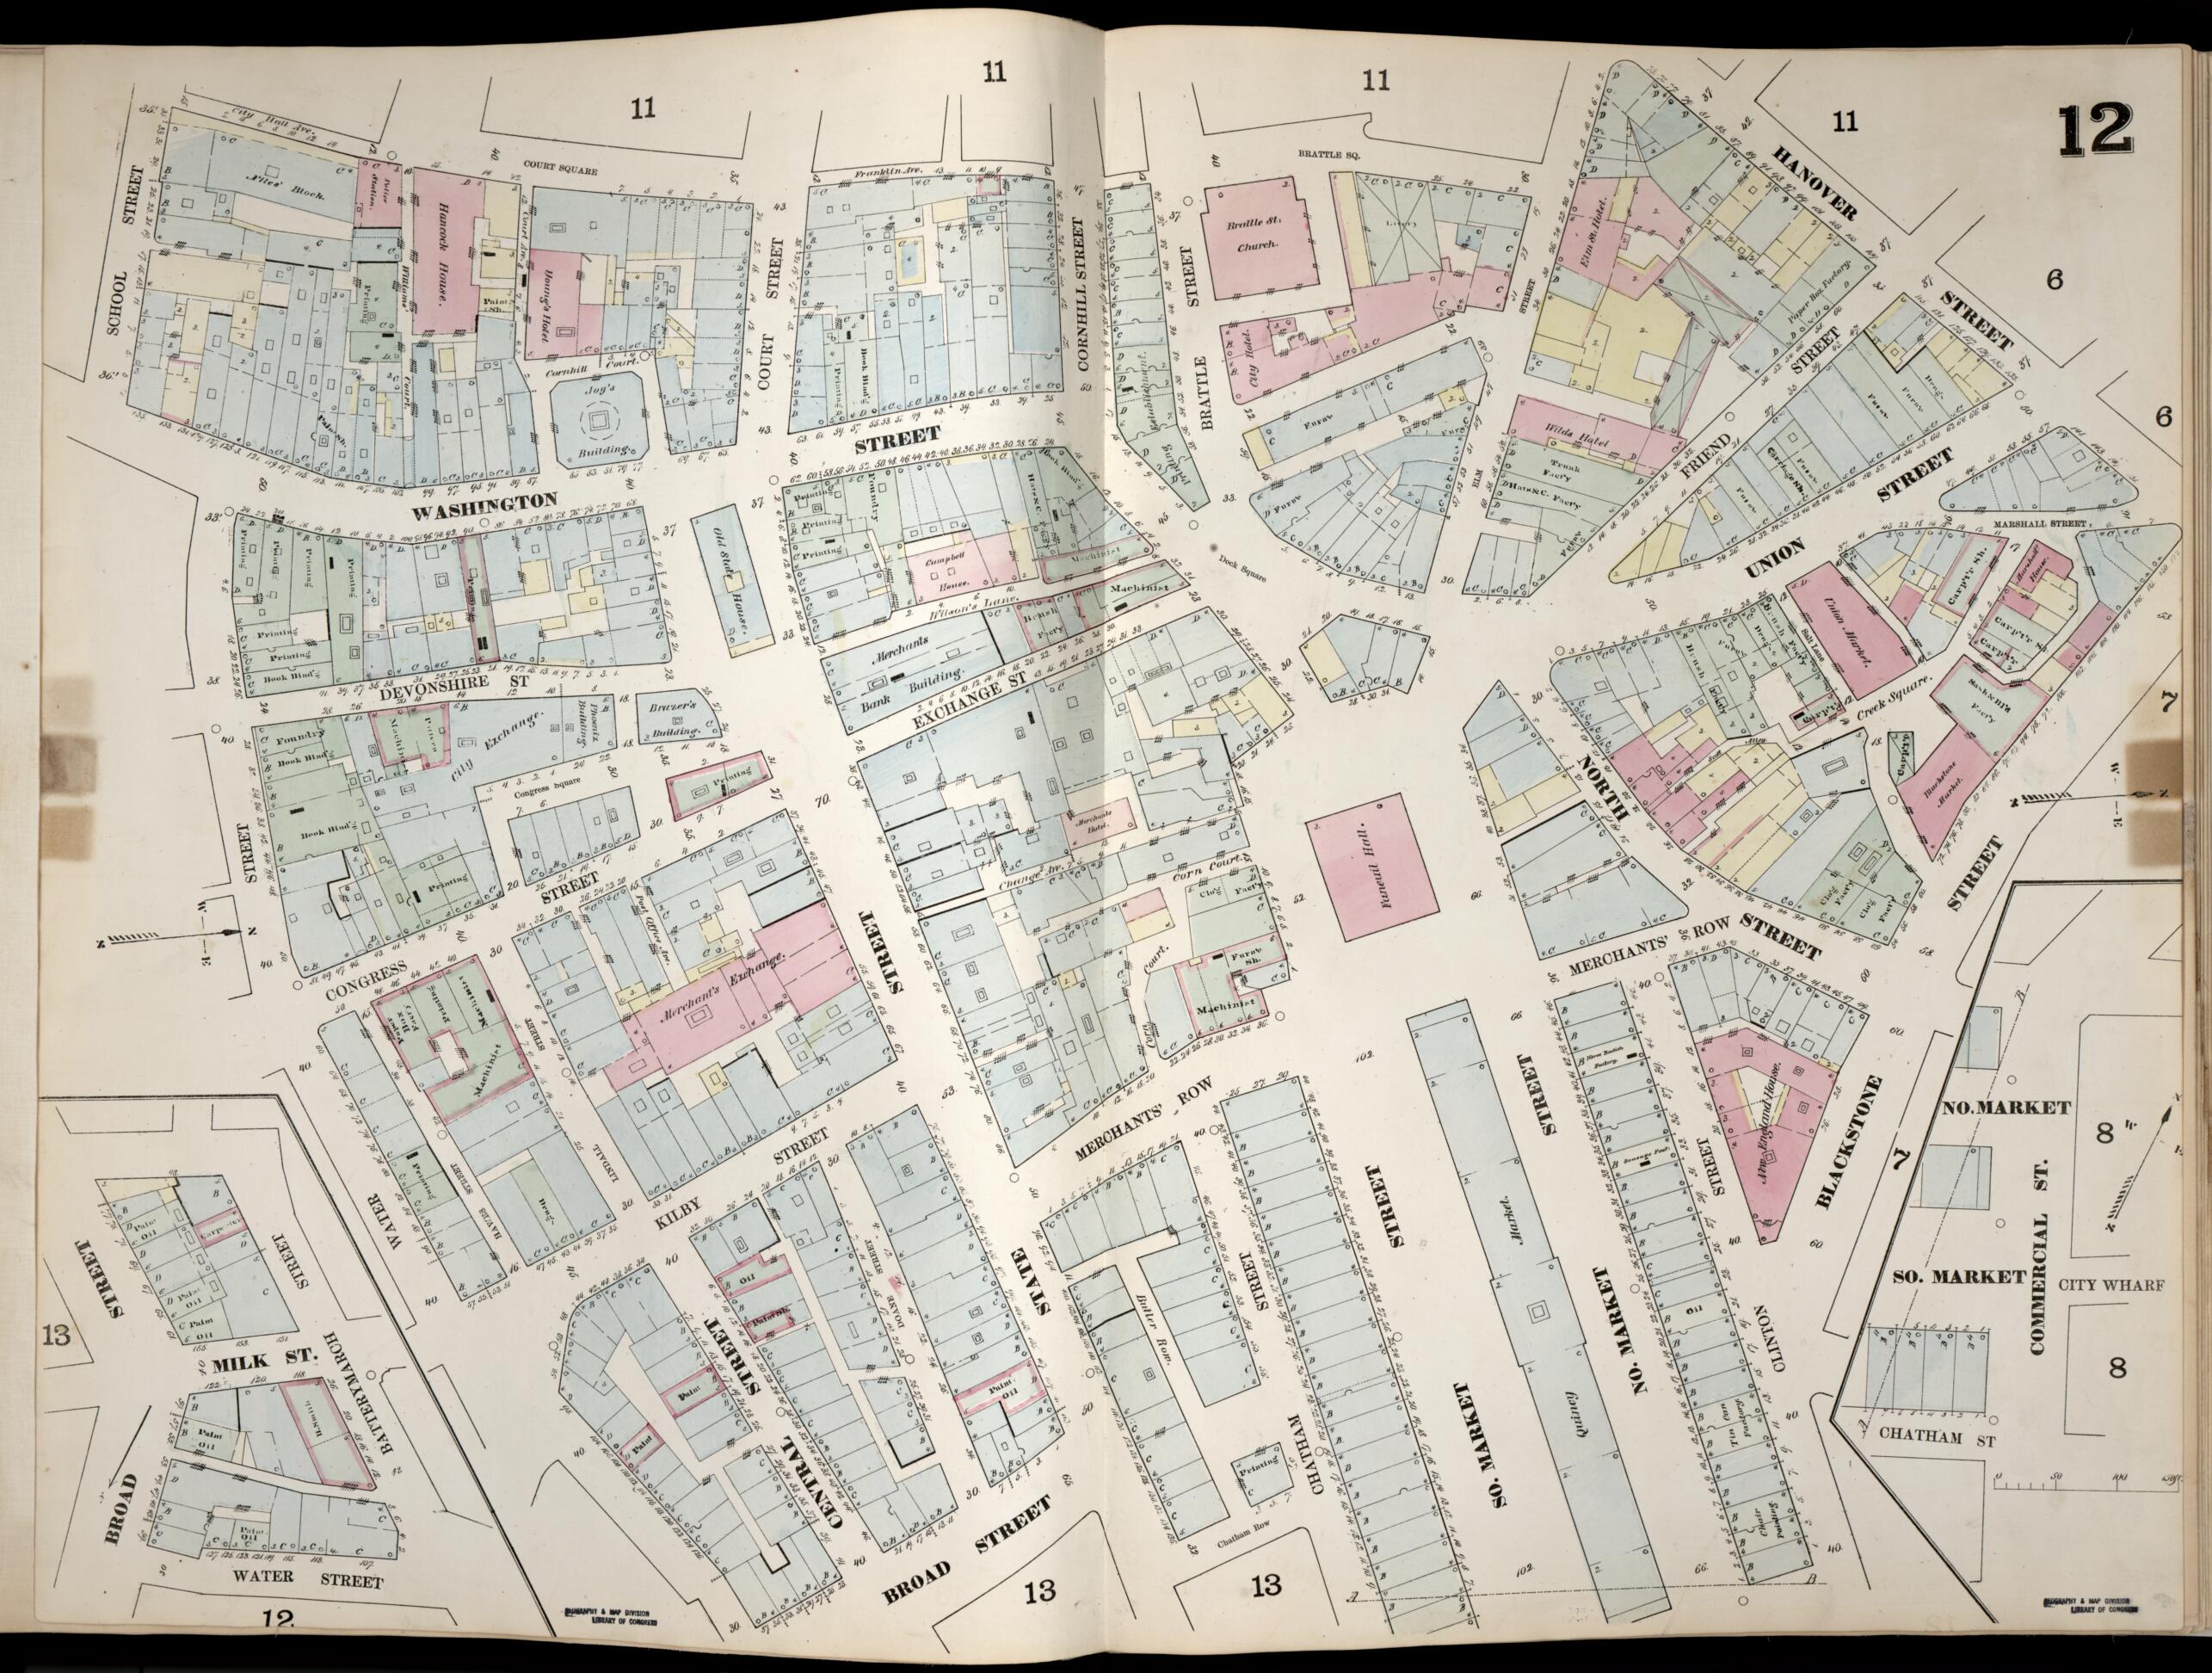 This old map of Image 13 of Boston from Insurance Map of Boston. Volume 1 from 1867 was created by D. A. (Daniel Alfred) Sanborn in 1867